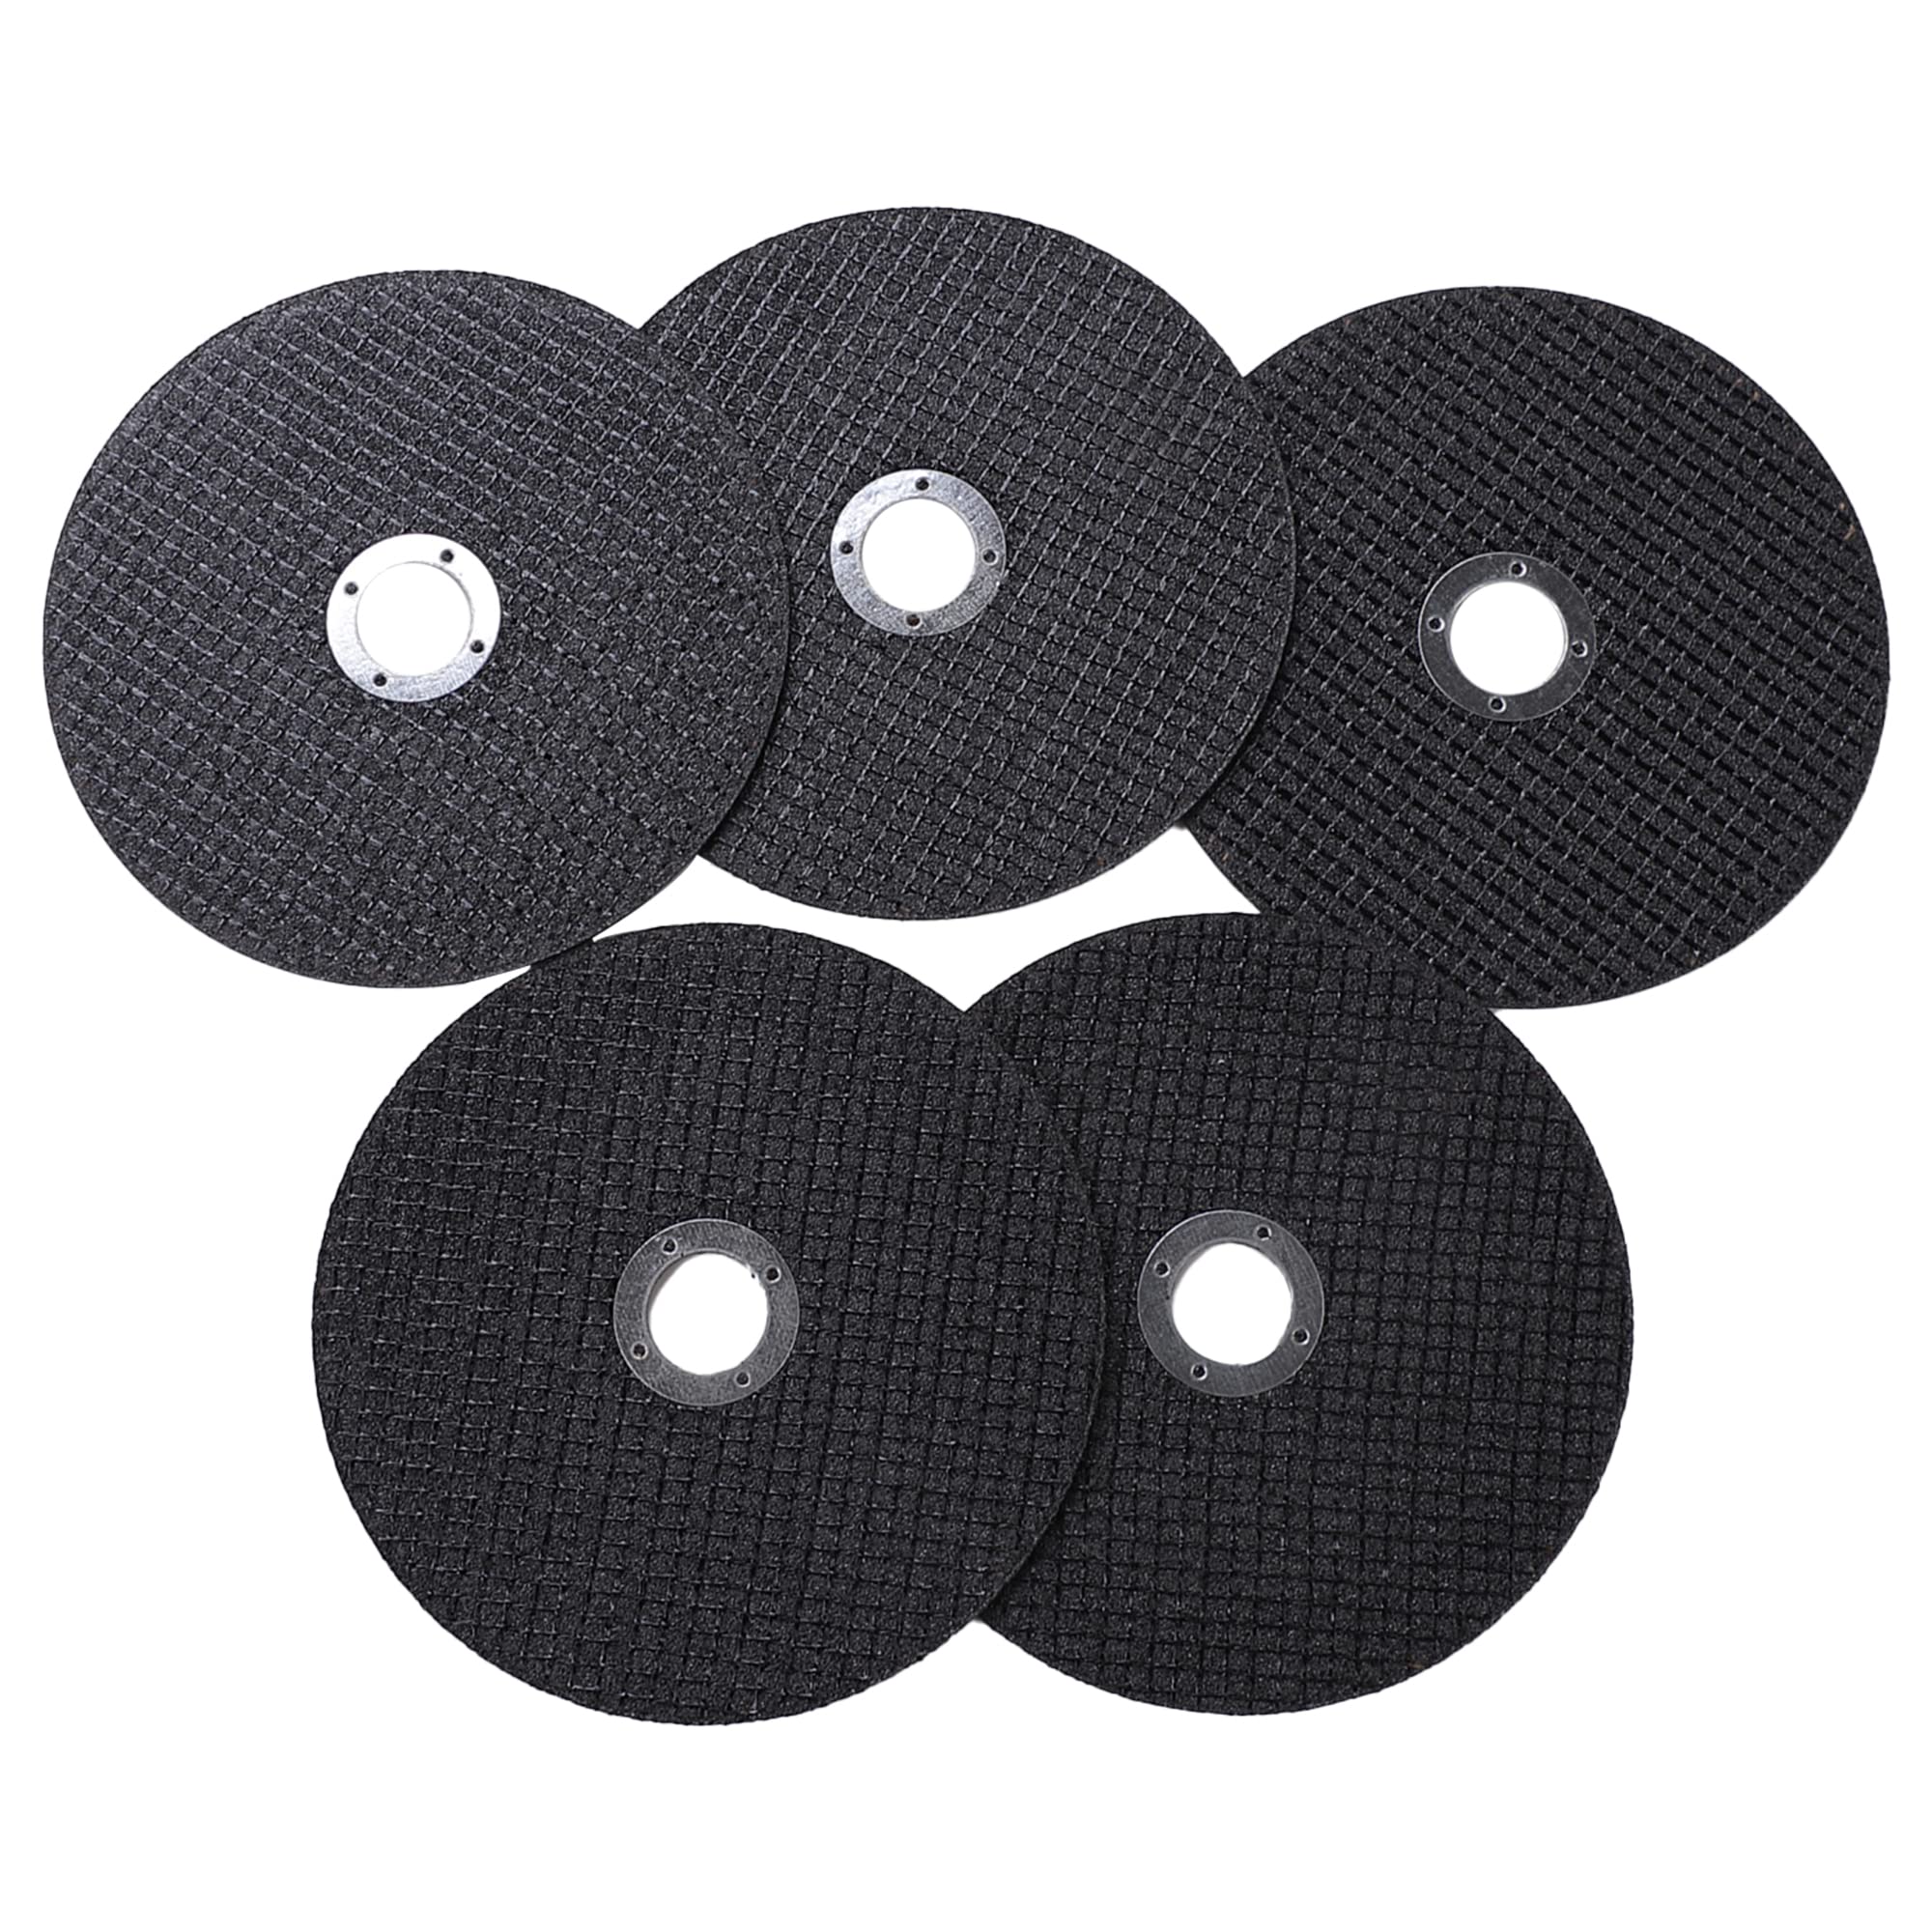 Cheston Cutting Wheel 4 Inch Cut Off Wheels I 107 X 1.2 X 16 mm (Pack of 5pcs) 100mm I Easy & Sharp Iron, Steel and Other Metal Cutting I Compatible with Bosch, Black+Decker Angle, Ibell Grinder (100mm/4inch)